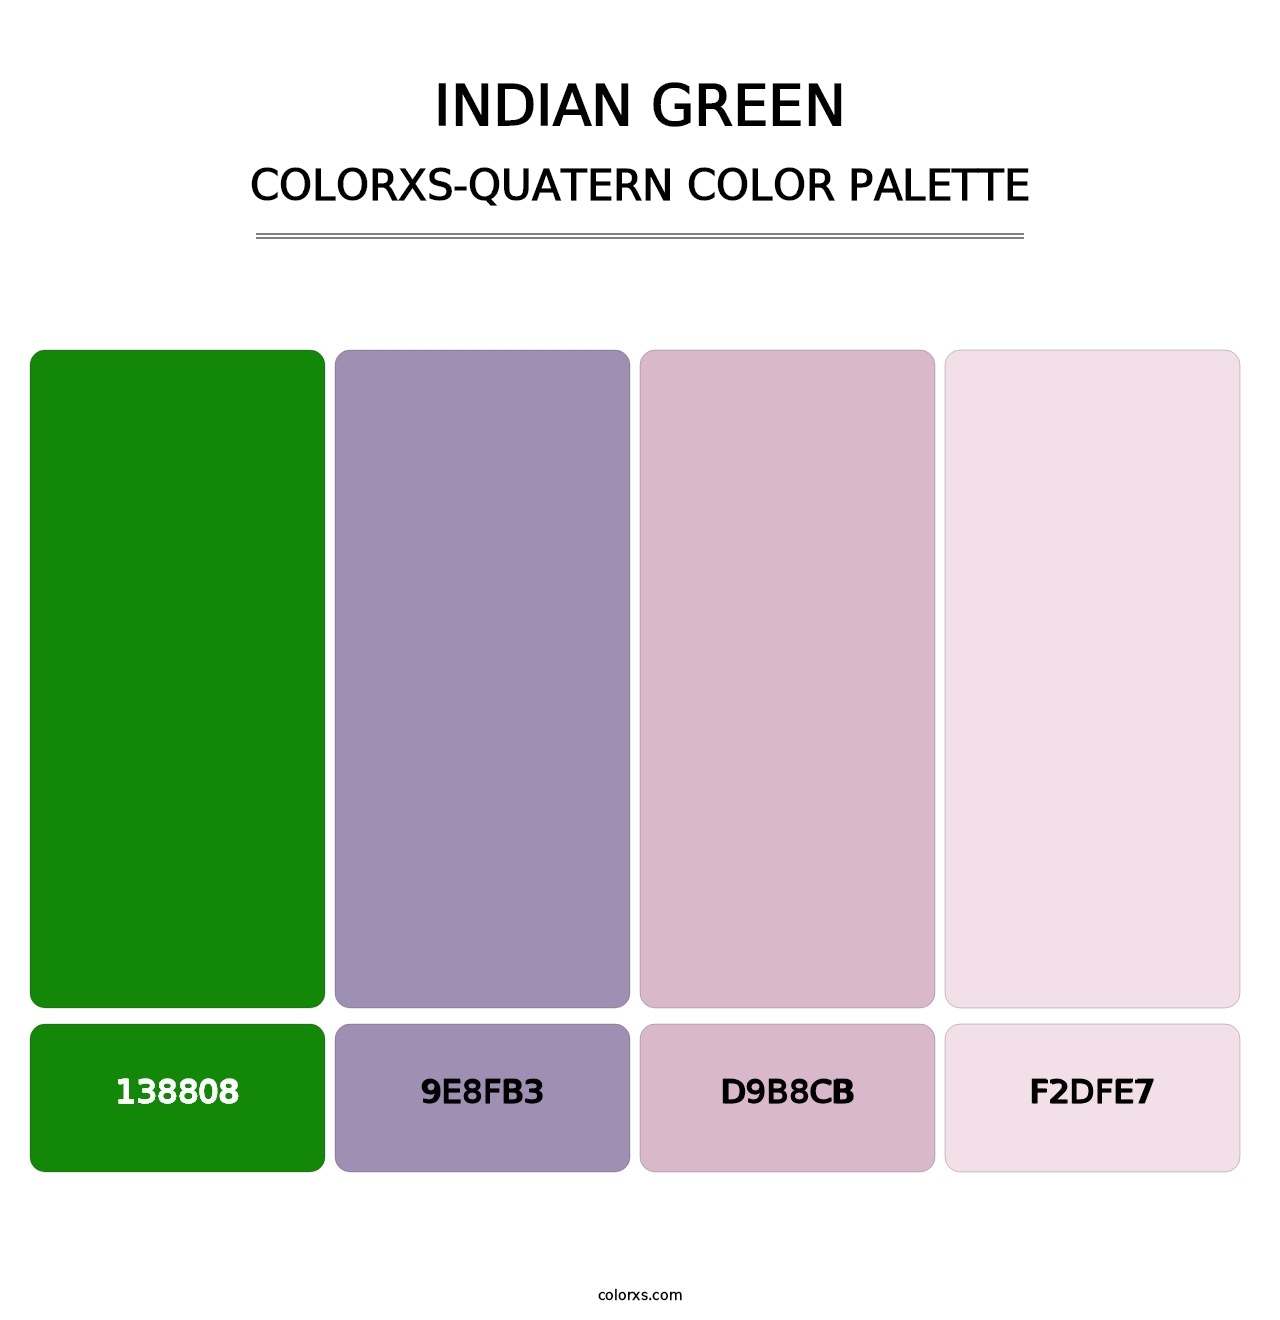 Indian Green - Colorxs Quatern Palette